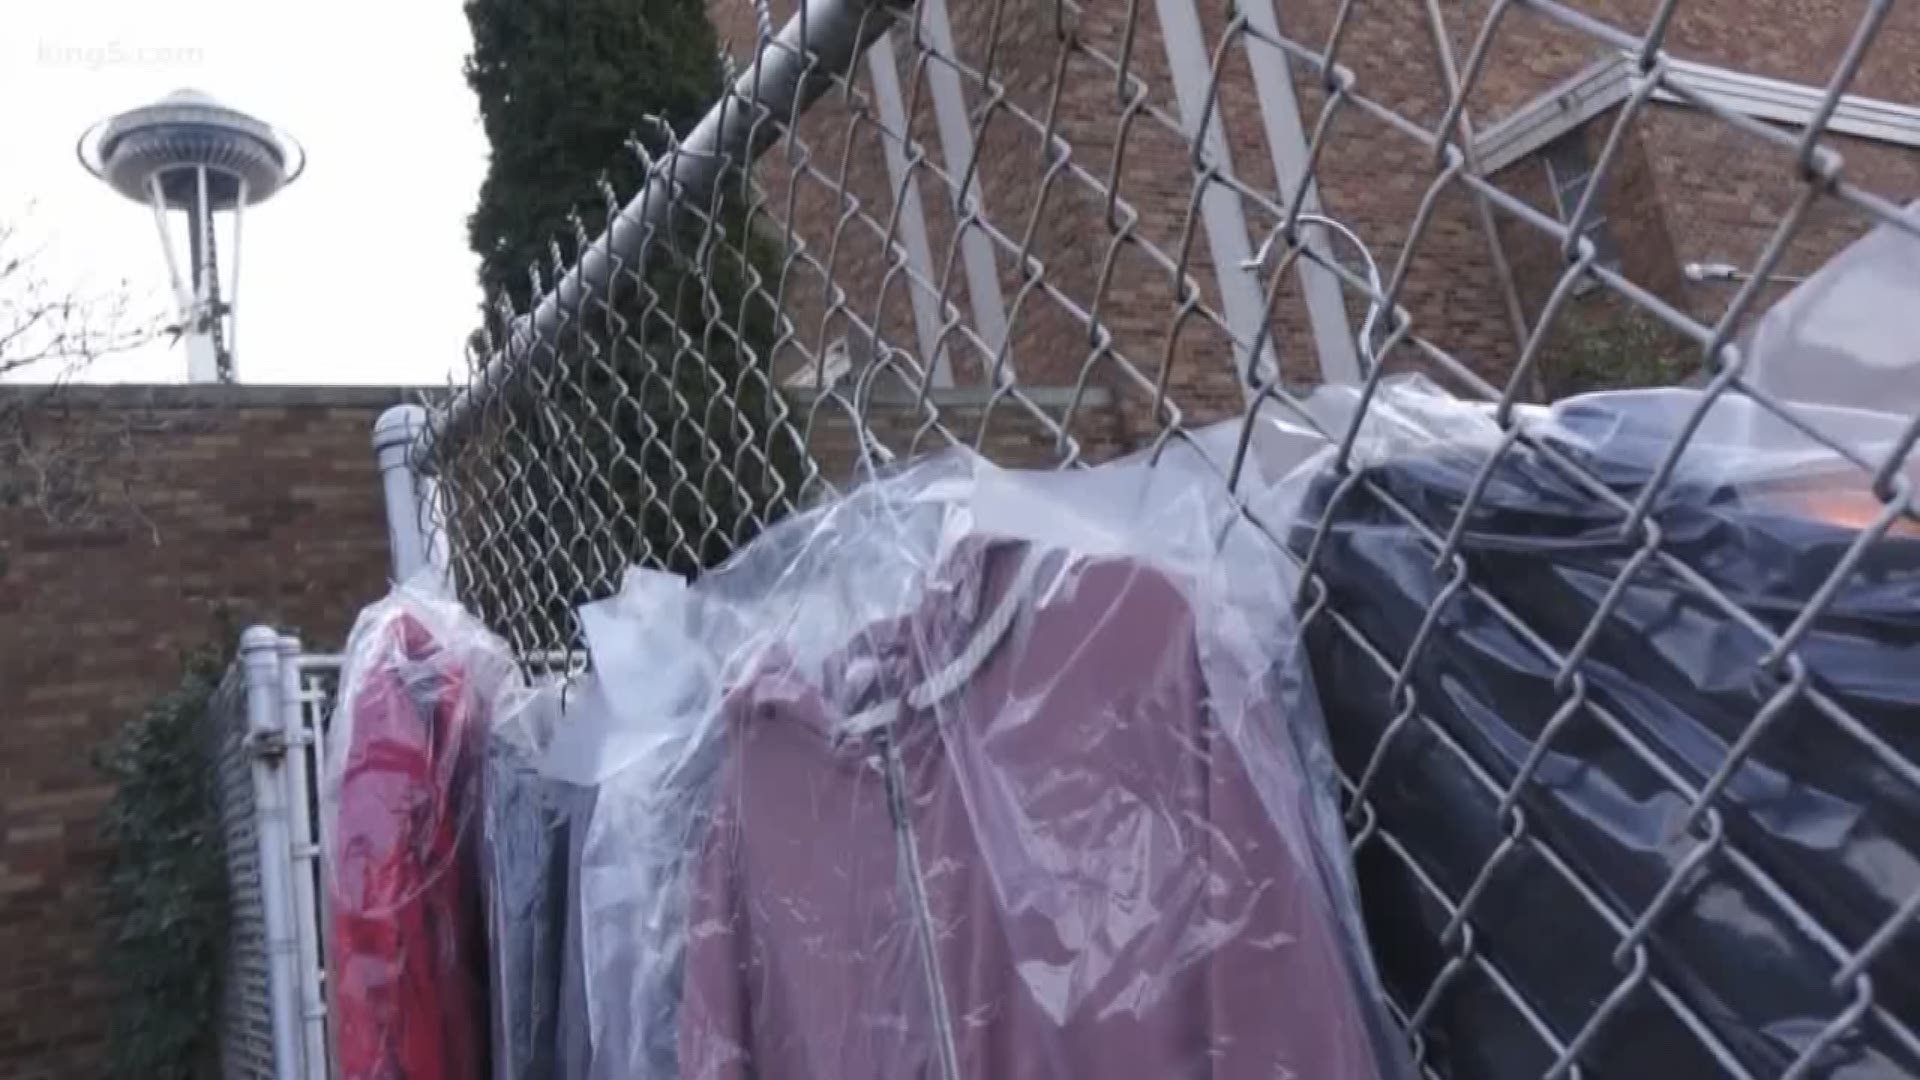 A group of volunteers in Seattle have started a coat drive called "Warm for Winter" for people living outdoors. It's happening at the Queen Anne Food Bank.